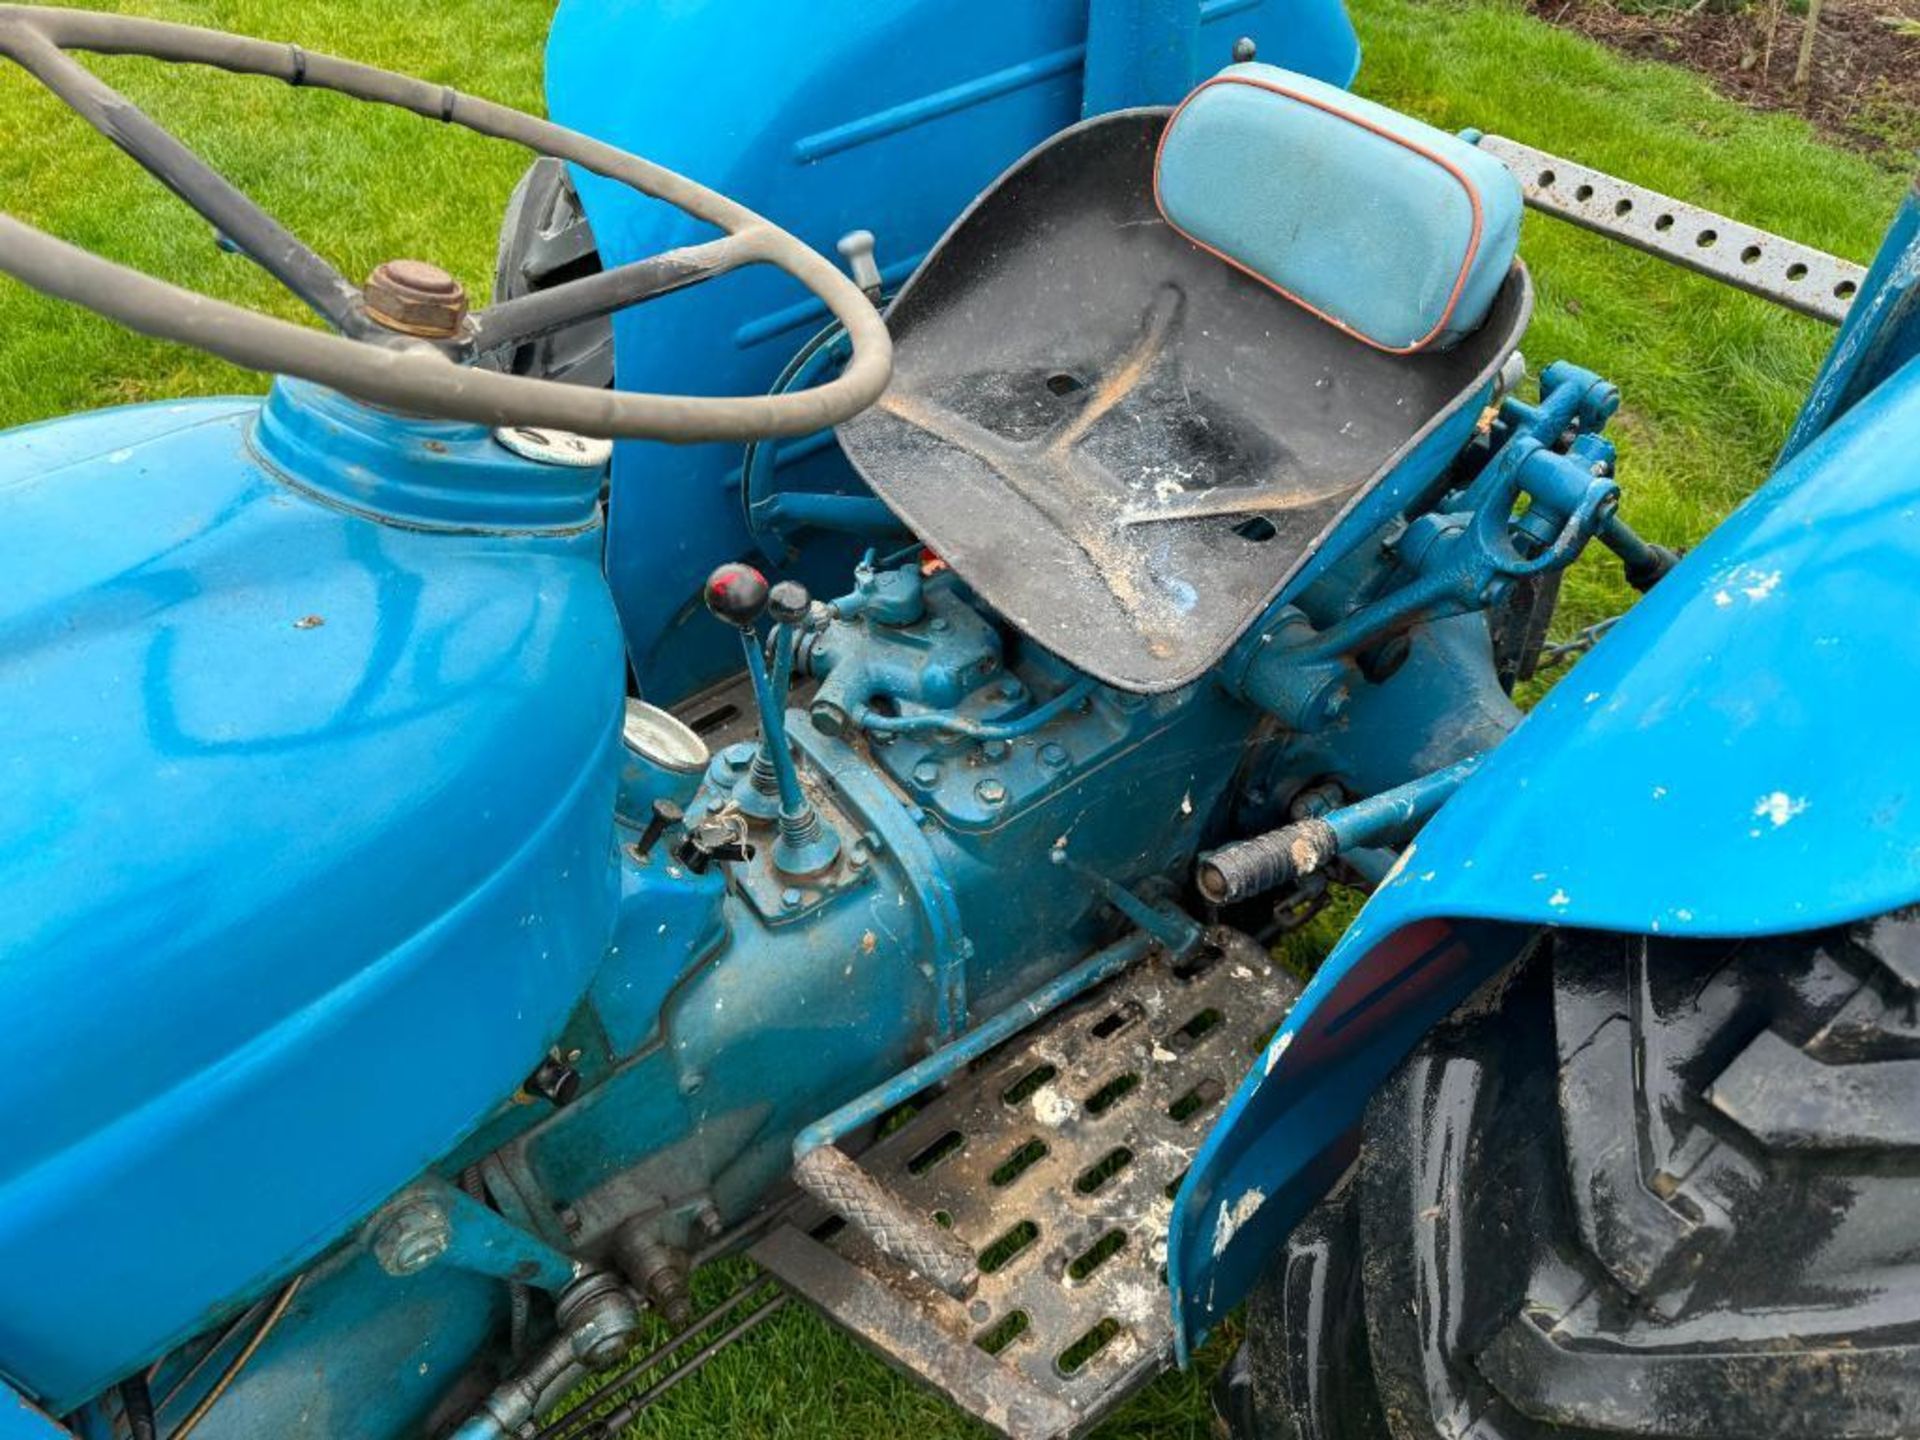 1962 Fordson Dexta 2wd diesel tractor with pick up hitch, rear linkage and rollbar on 12.4/11-28 rea - Image 12 of 14